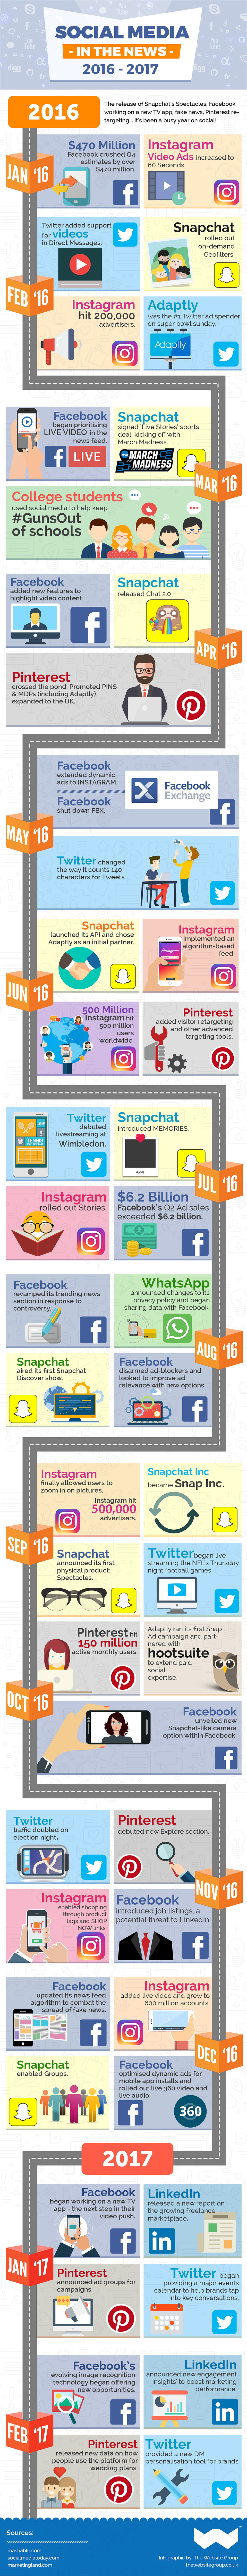 Social Media in the News 2016 - 2017 [INFOGRAPHIC]